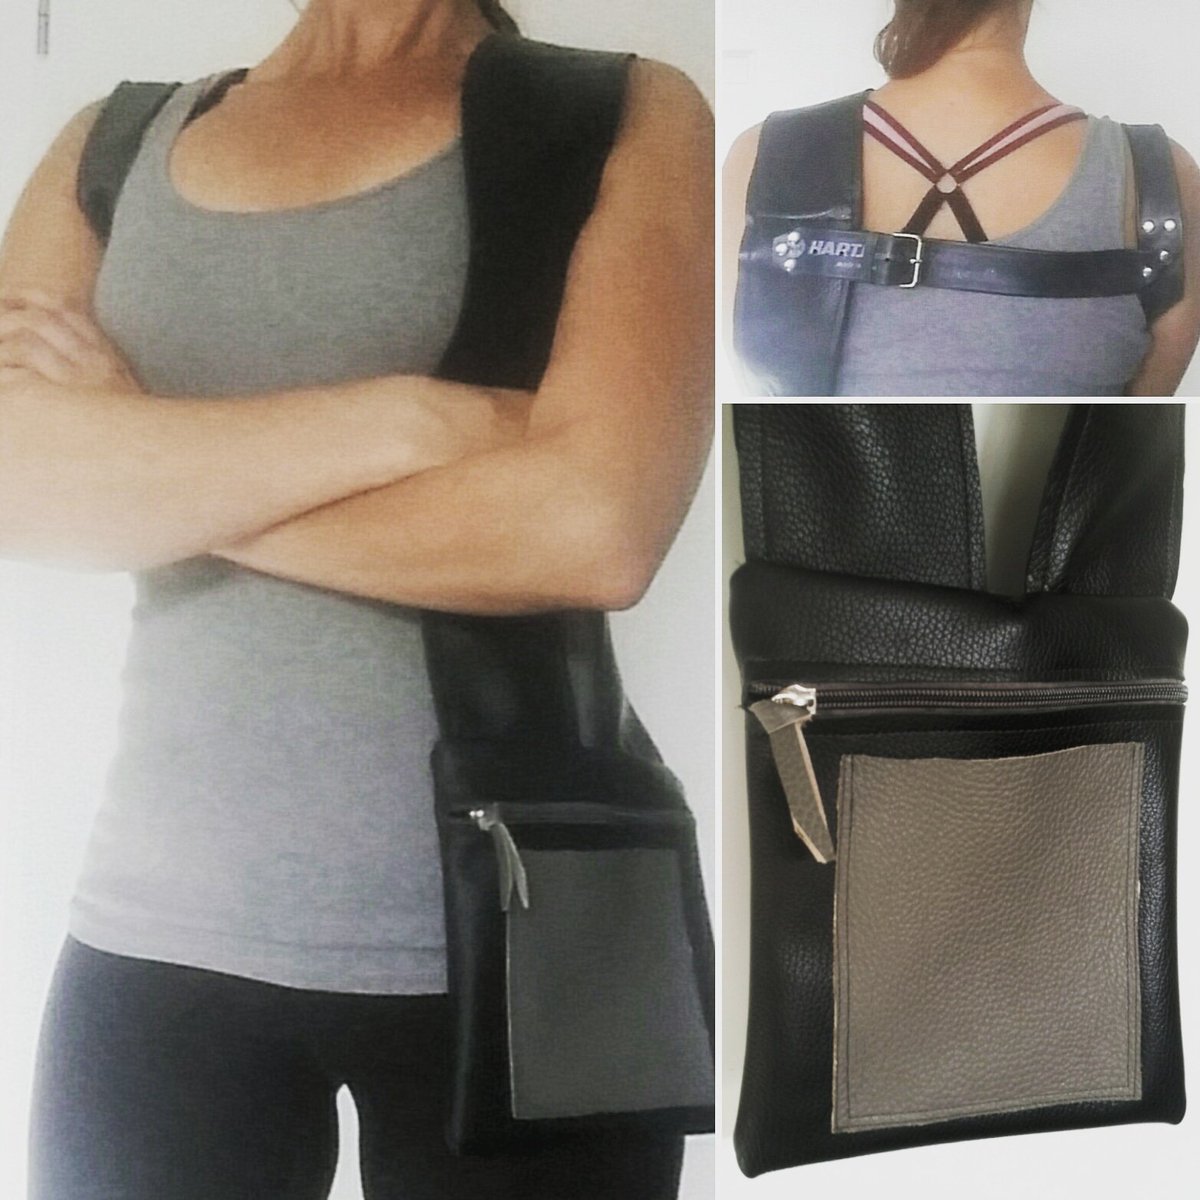 Trying a new concept. First prototype.
#holsterbag #handsup #reclaimedleather #coolbag